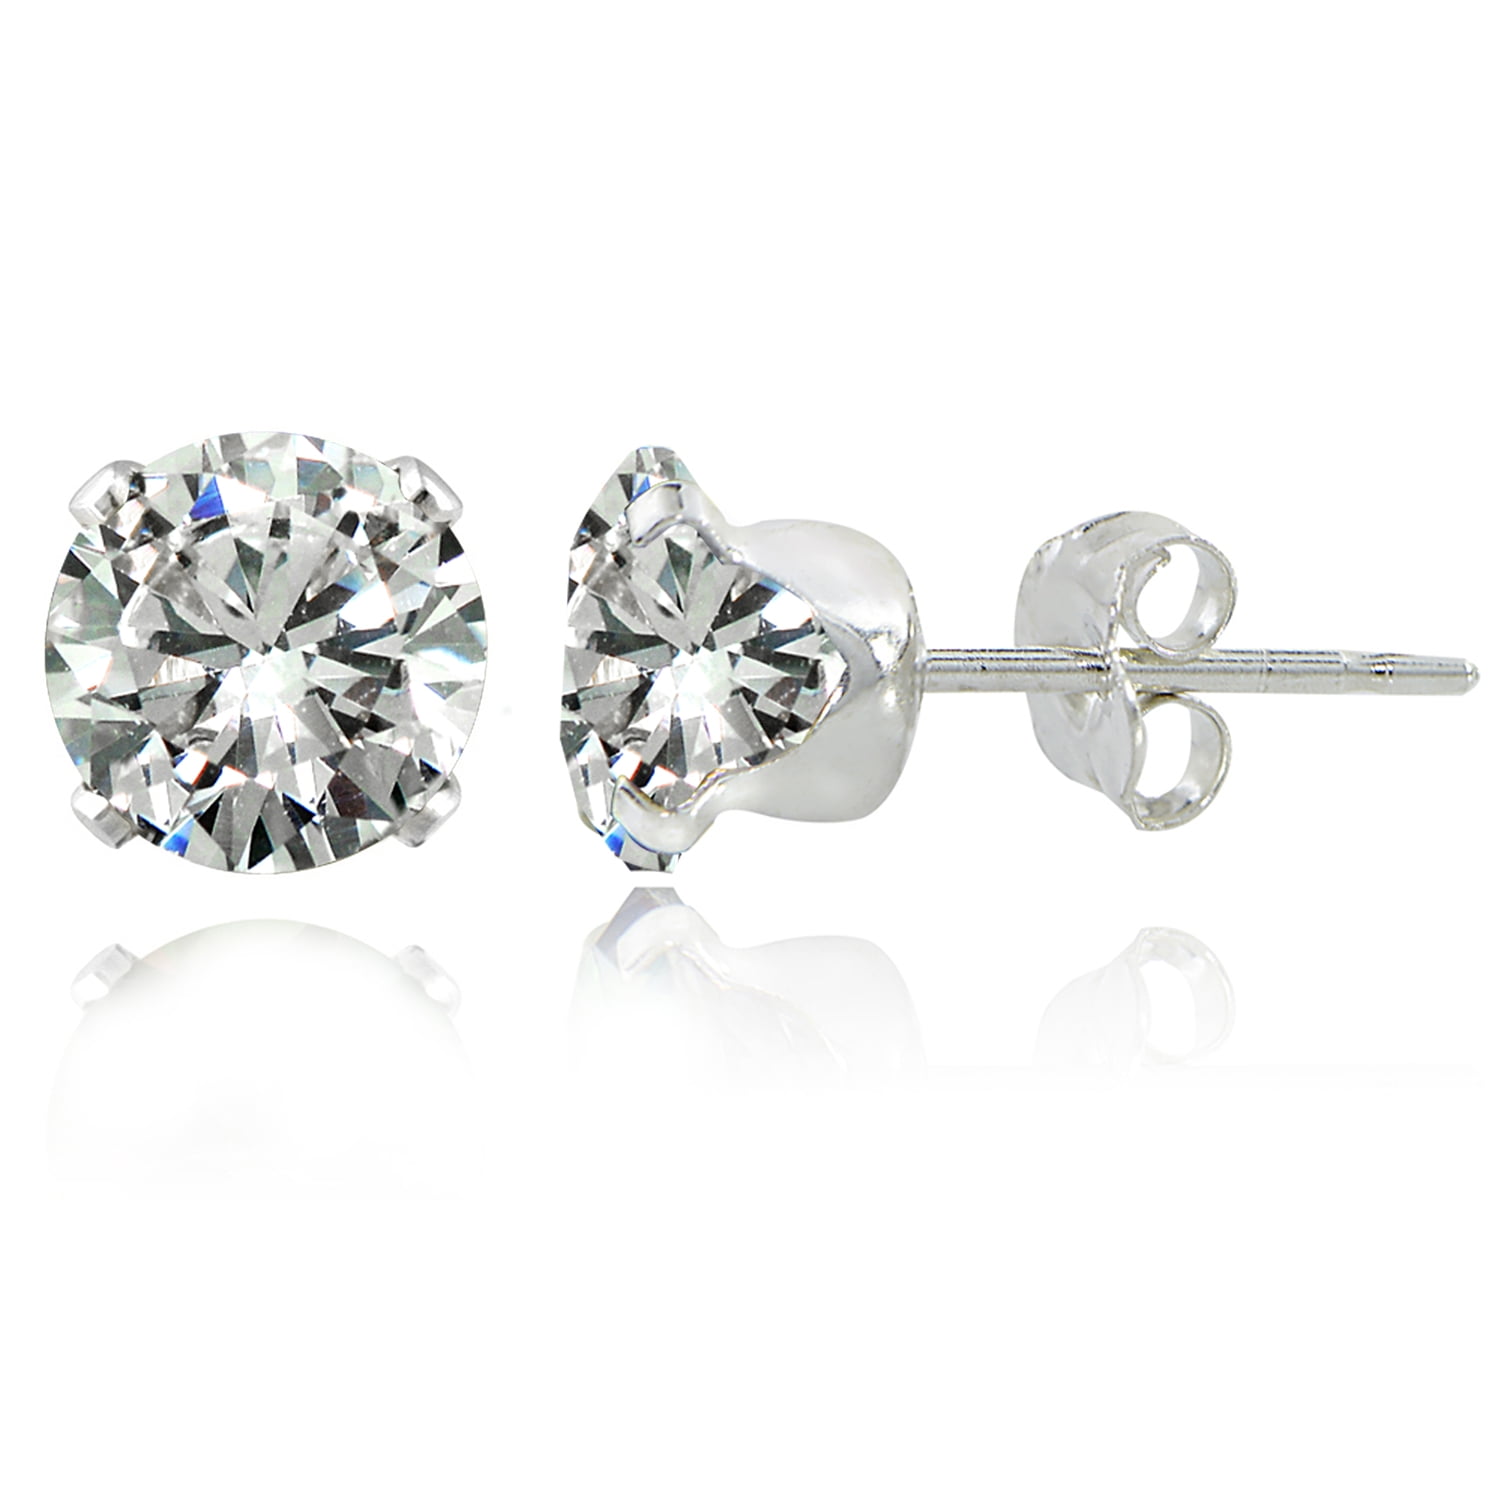 Sterling Silver Clear Crystal Elegant Stud Earrings Choose your Colour. 